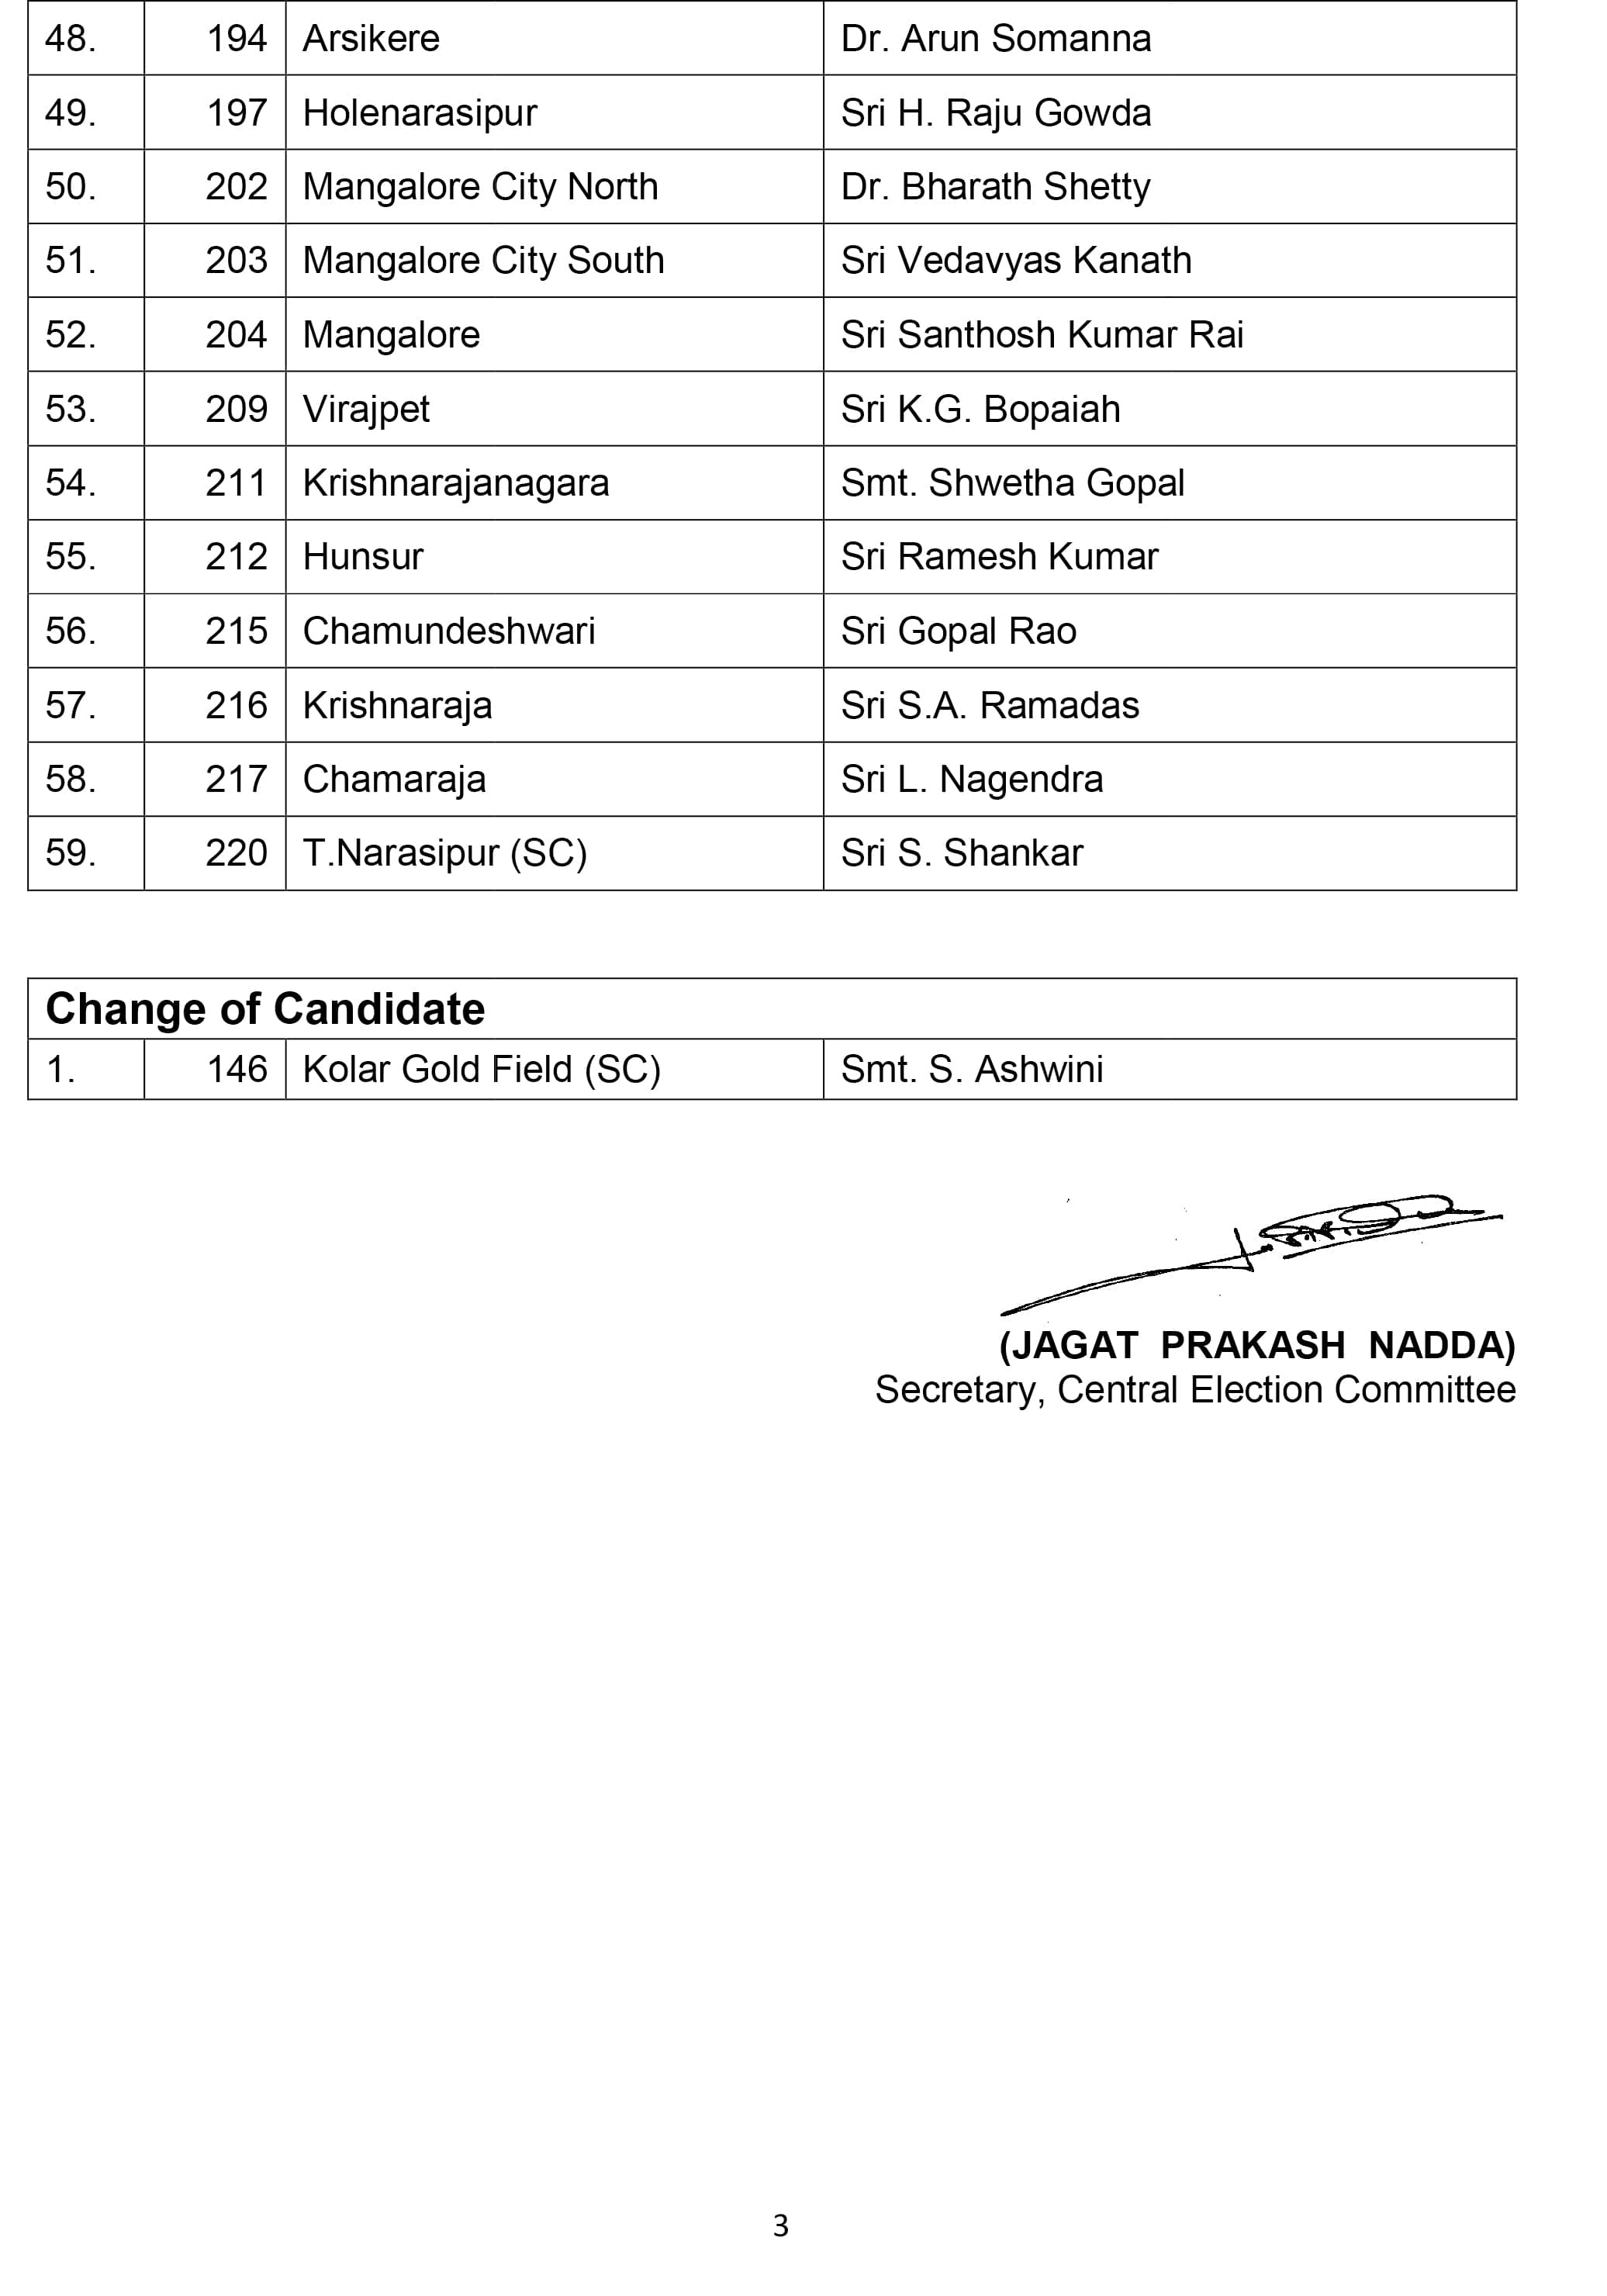 BJP Releases 3rd List for Karnataka Assembly Elections 2018